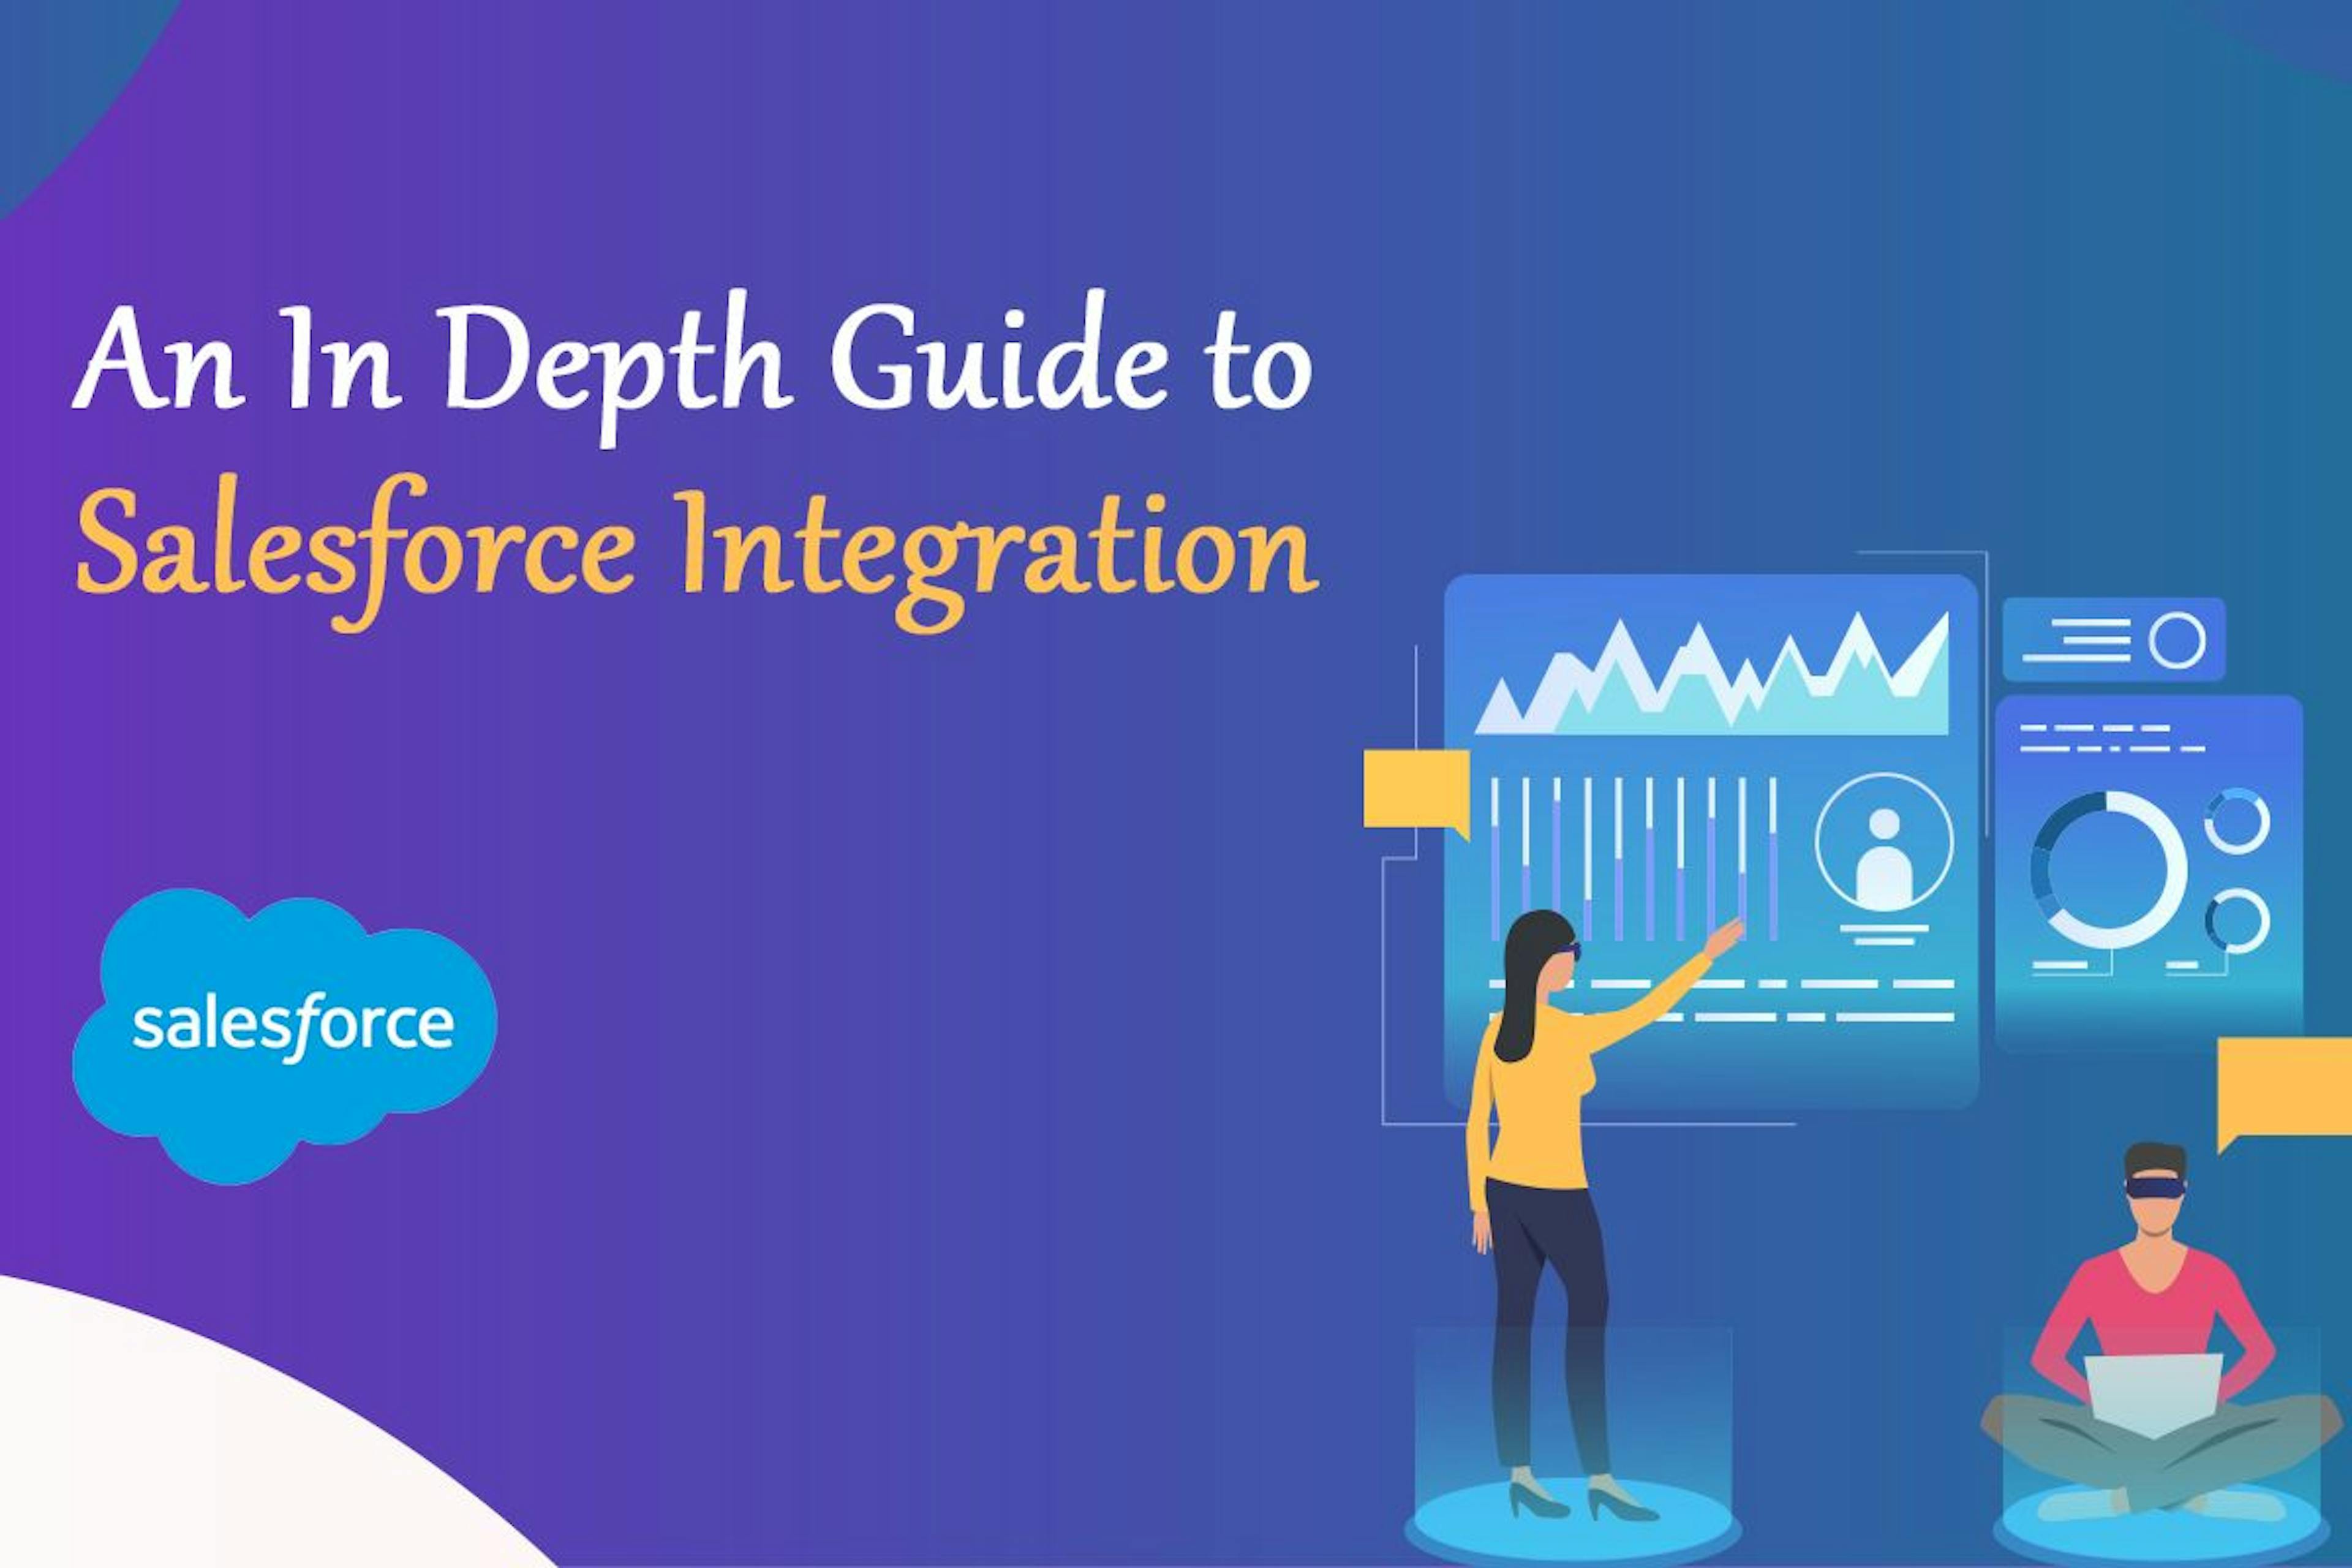 featured image - An In-Depth Guide to Salesforce Integration